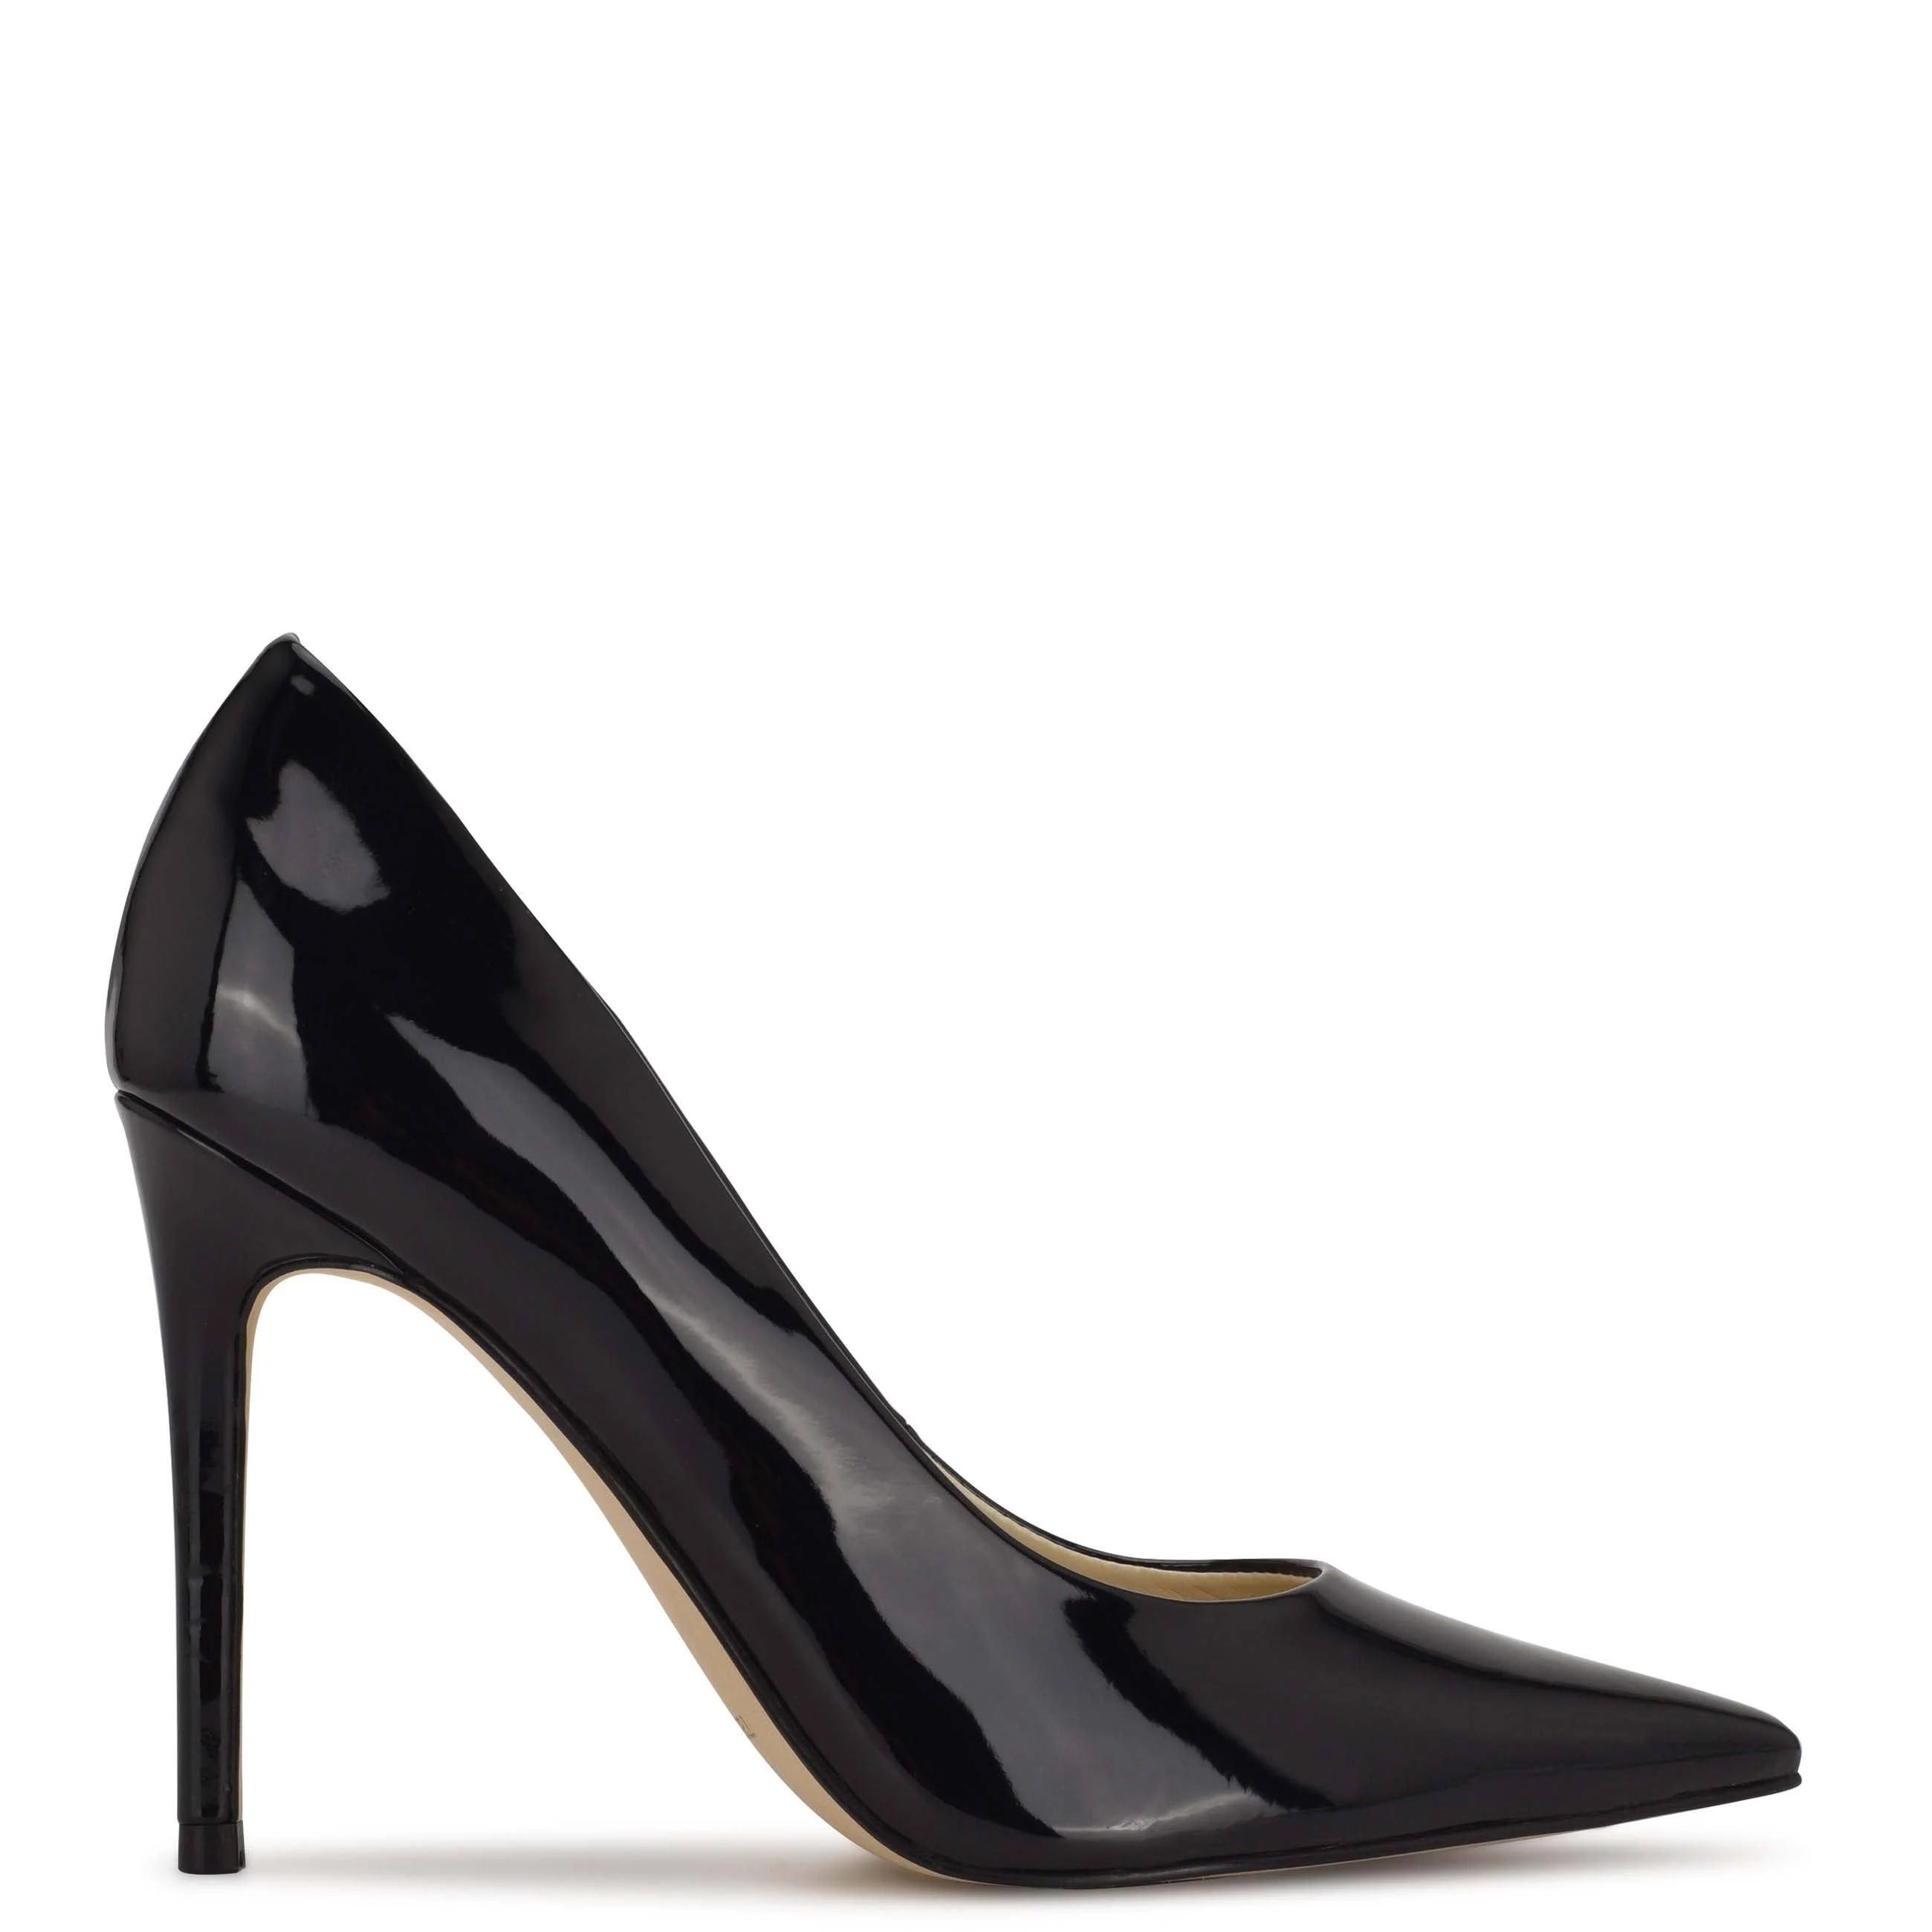 Fashionable Black Stiletto Heels to Elevate Your Look | Image